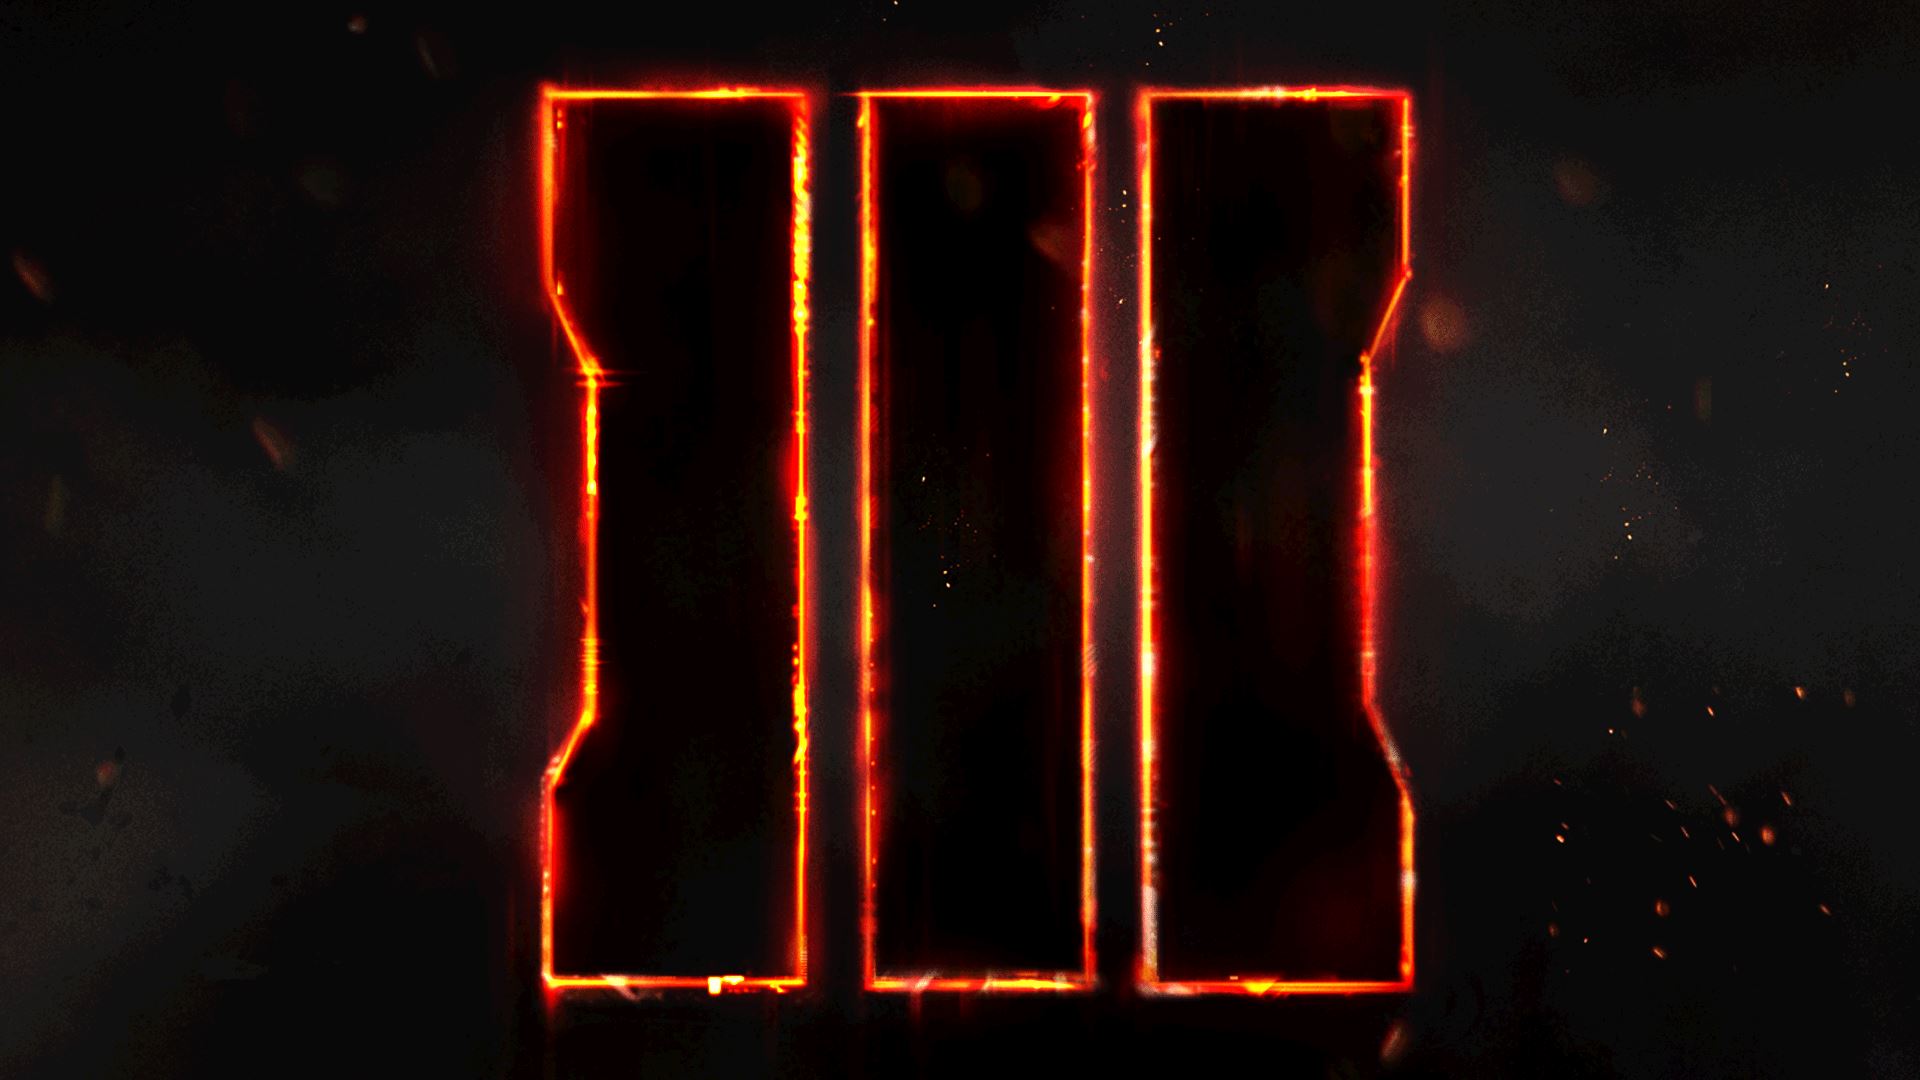 Call of Duty Black Ops III Digital Deluxe Edition 1920x1080